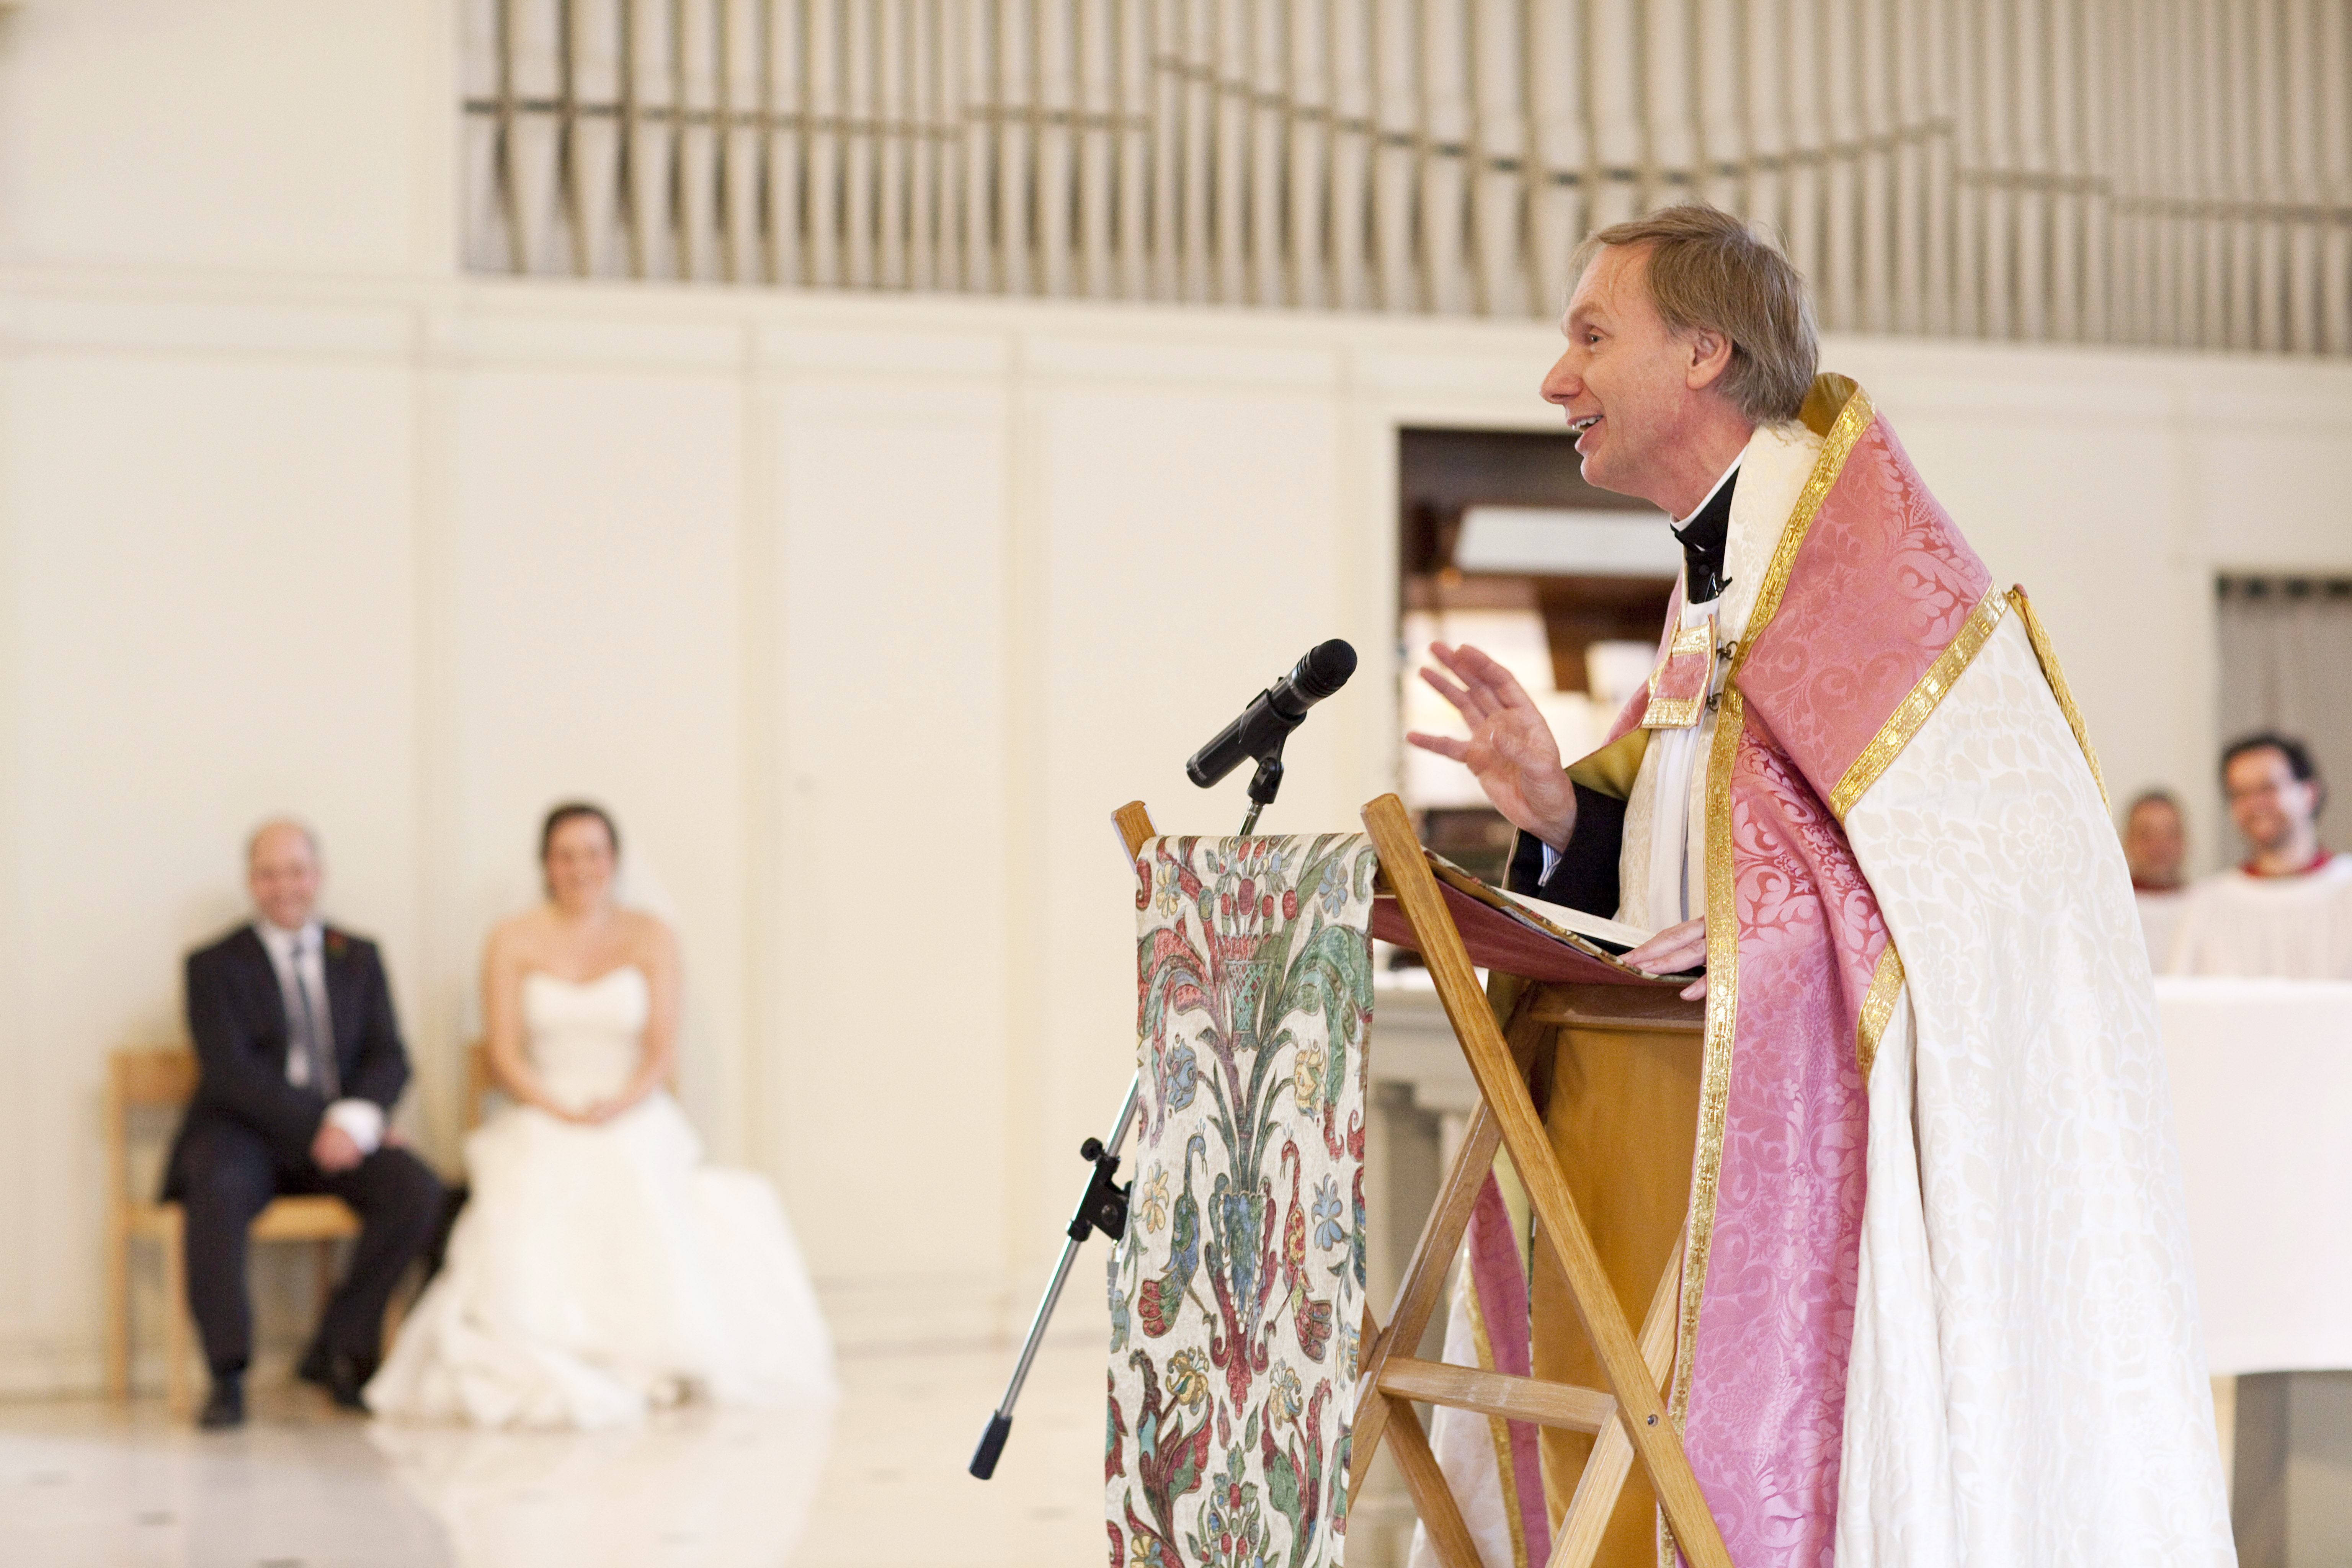 Our vicar, Anders Bergquist, preaching at a wedding, with the couple in the background. Photograph taken by Helen Maybanks.